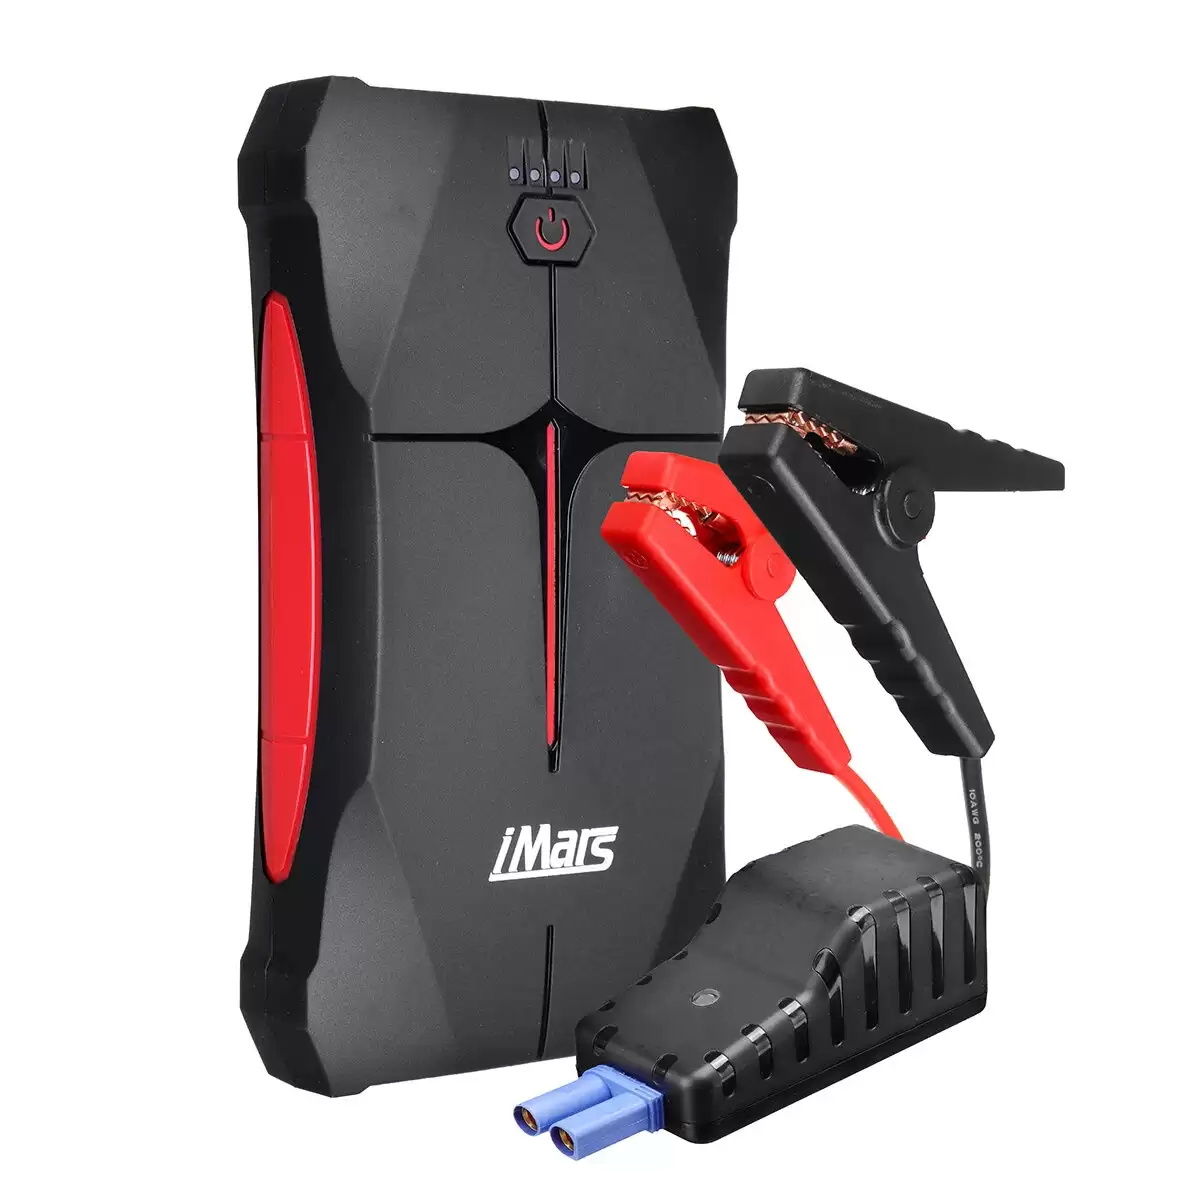 Order In Just $37.99 Imars Portable Car Jump Starter 1000a 13800mah Powerbank Emergency Battery Booster Waterproof With Led Flashlight Usb Port With This Coupon At Banggood